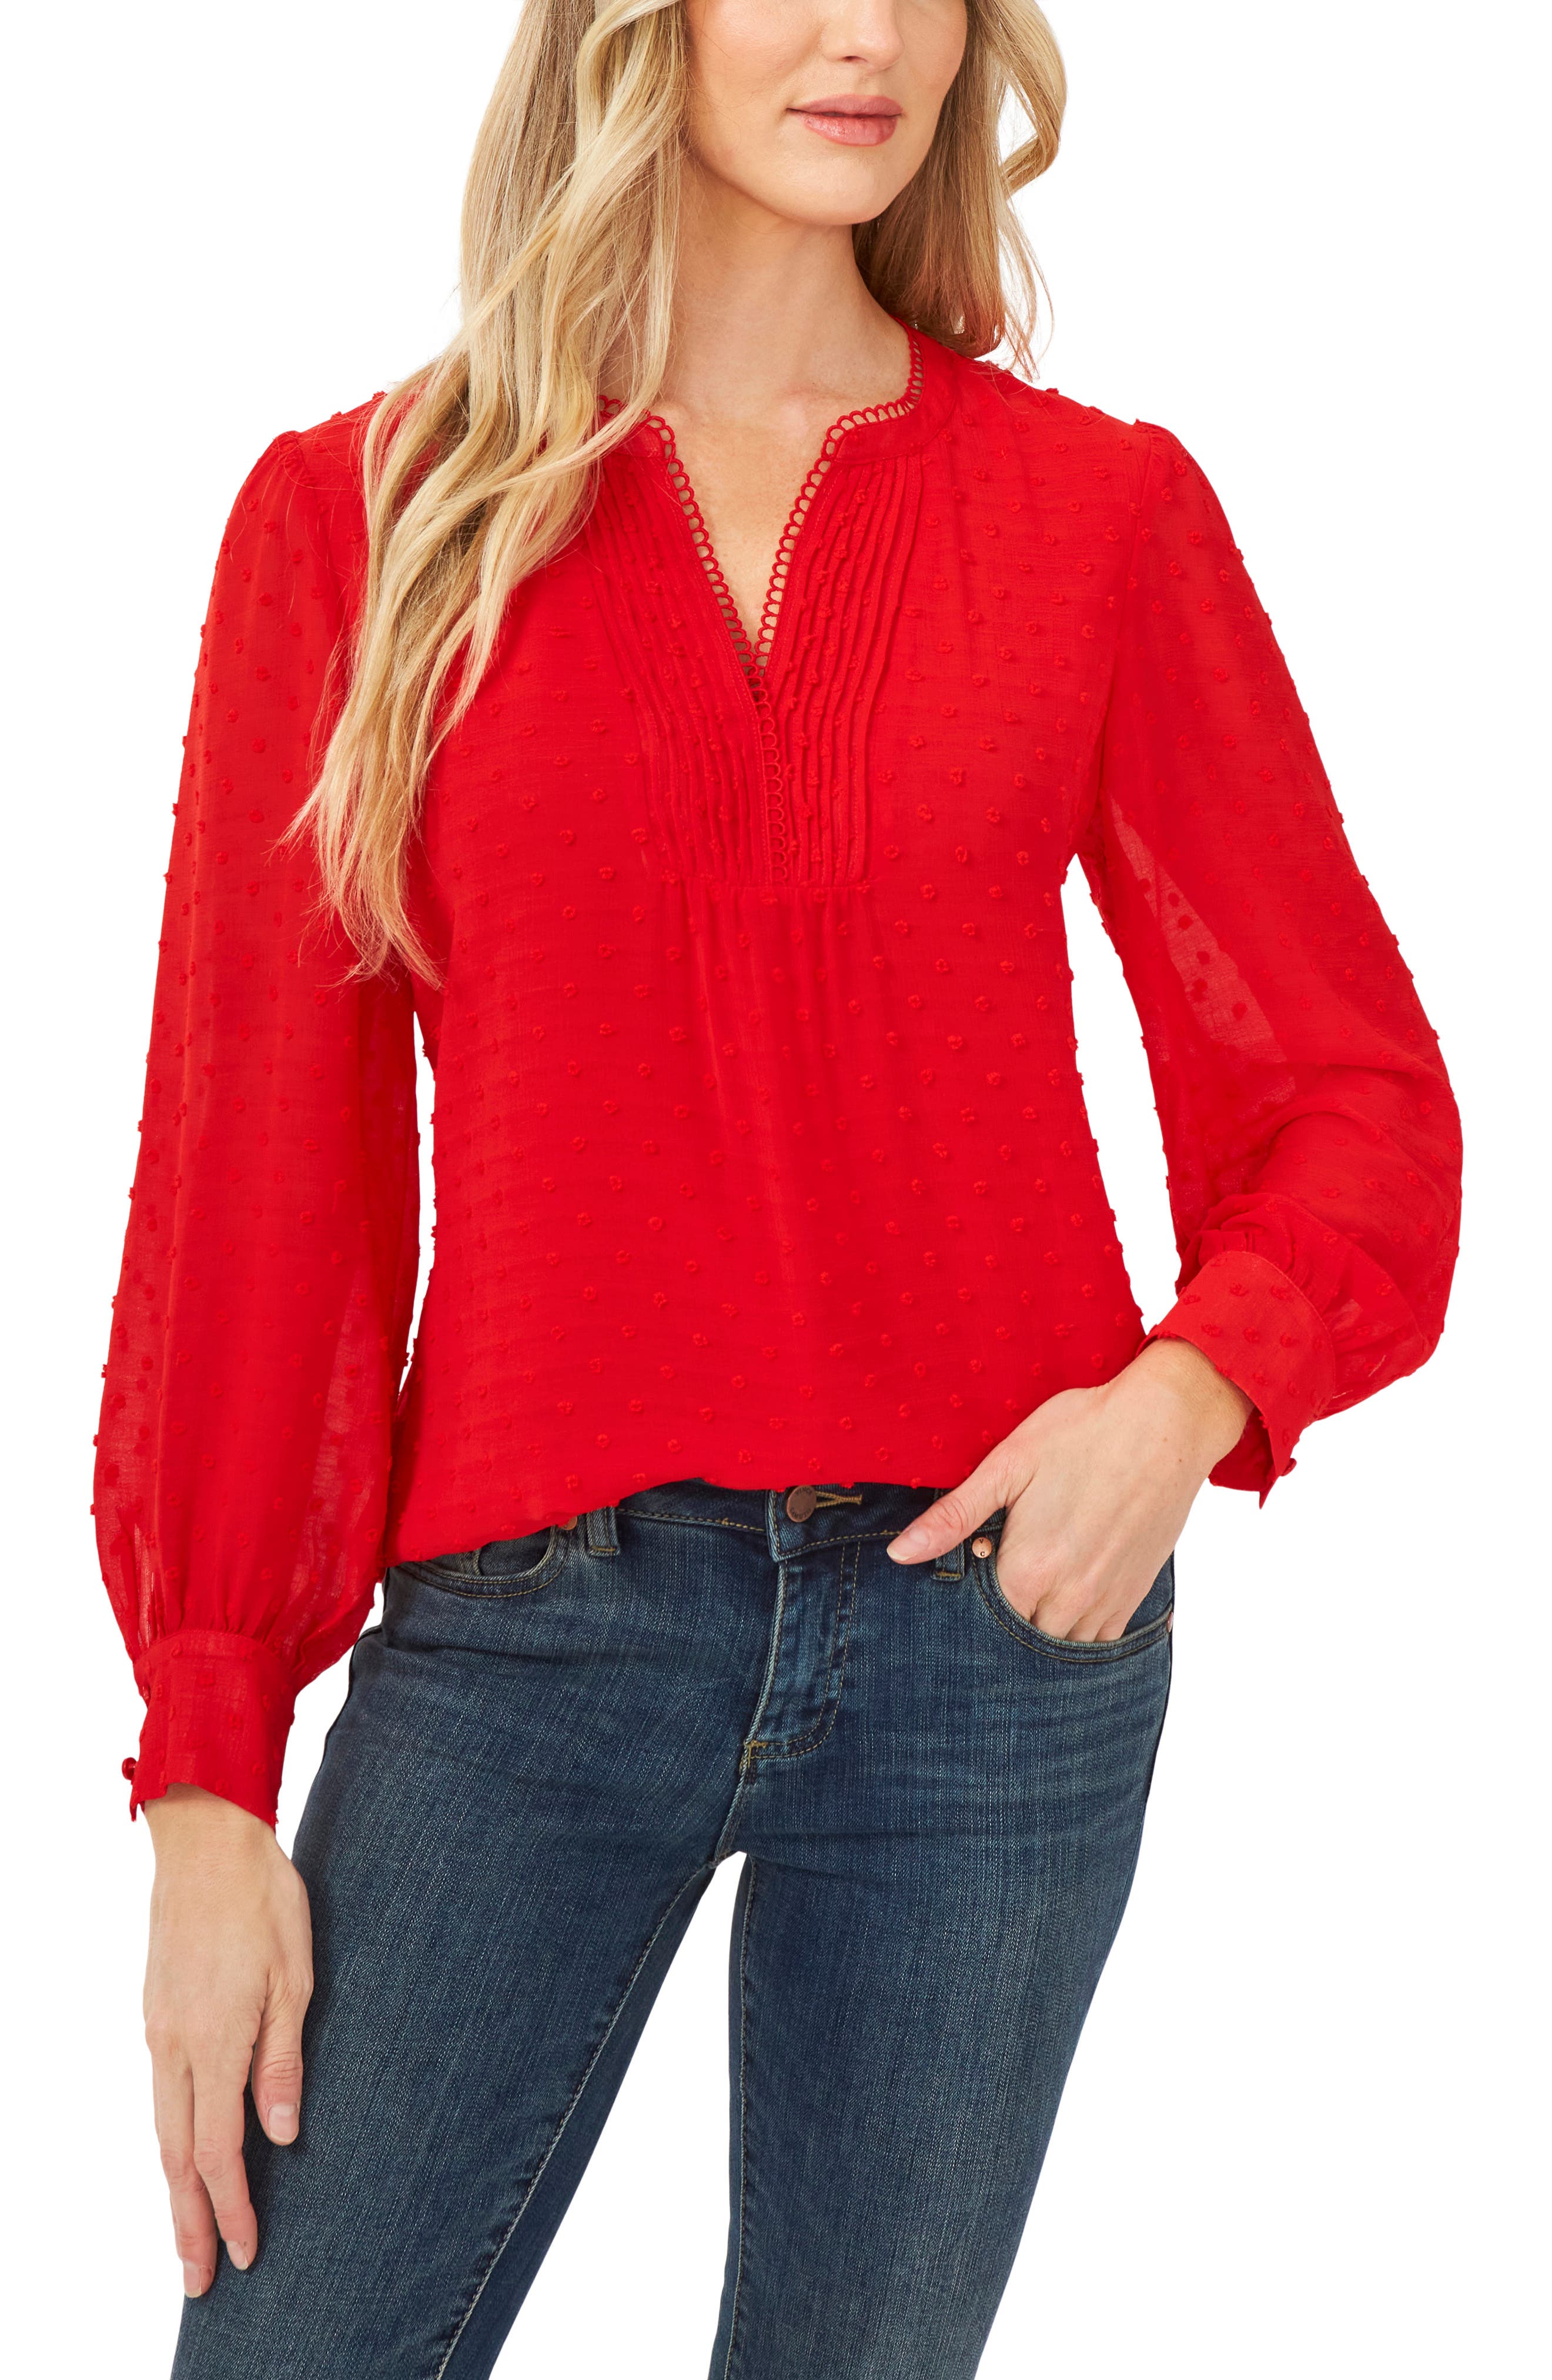 red tops for women